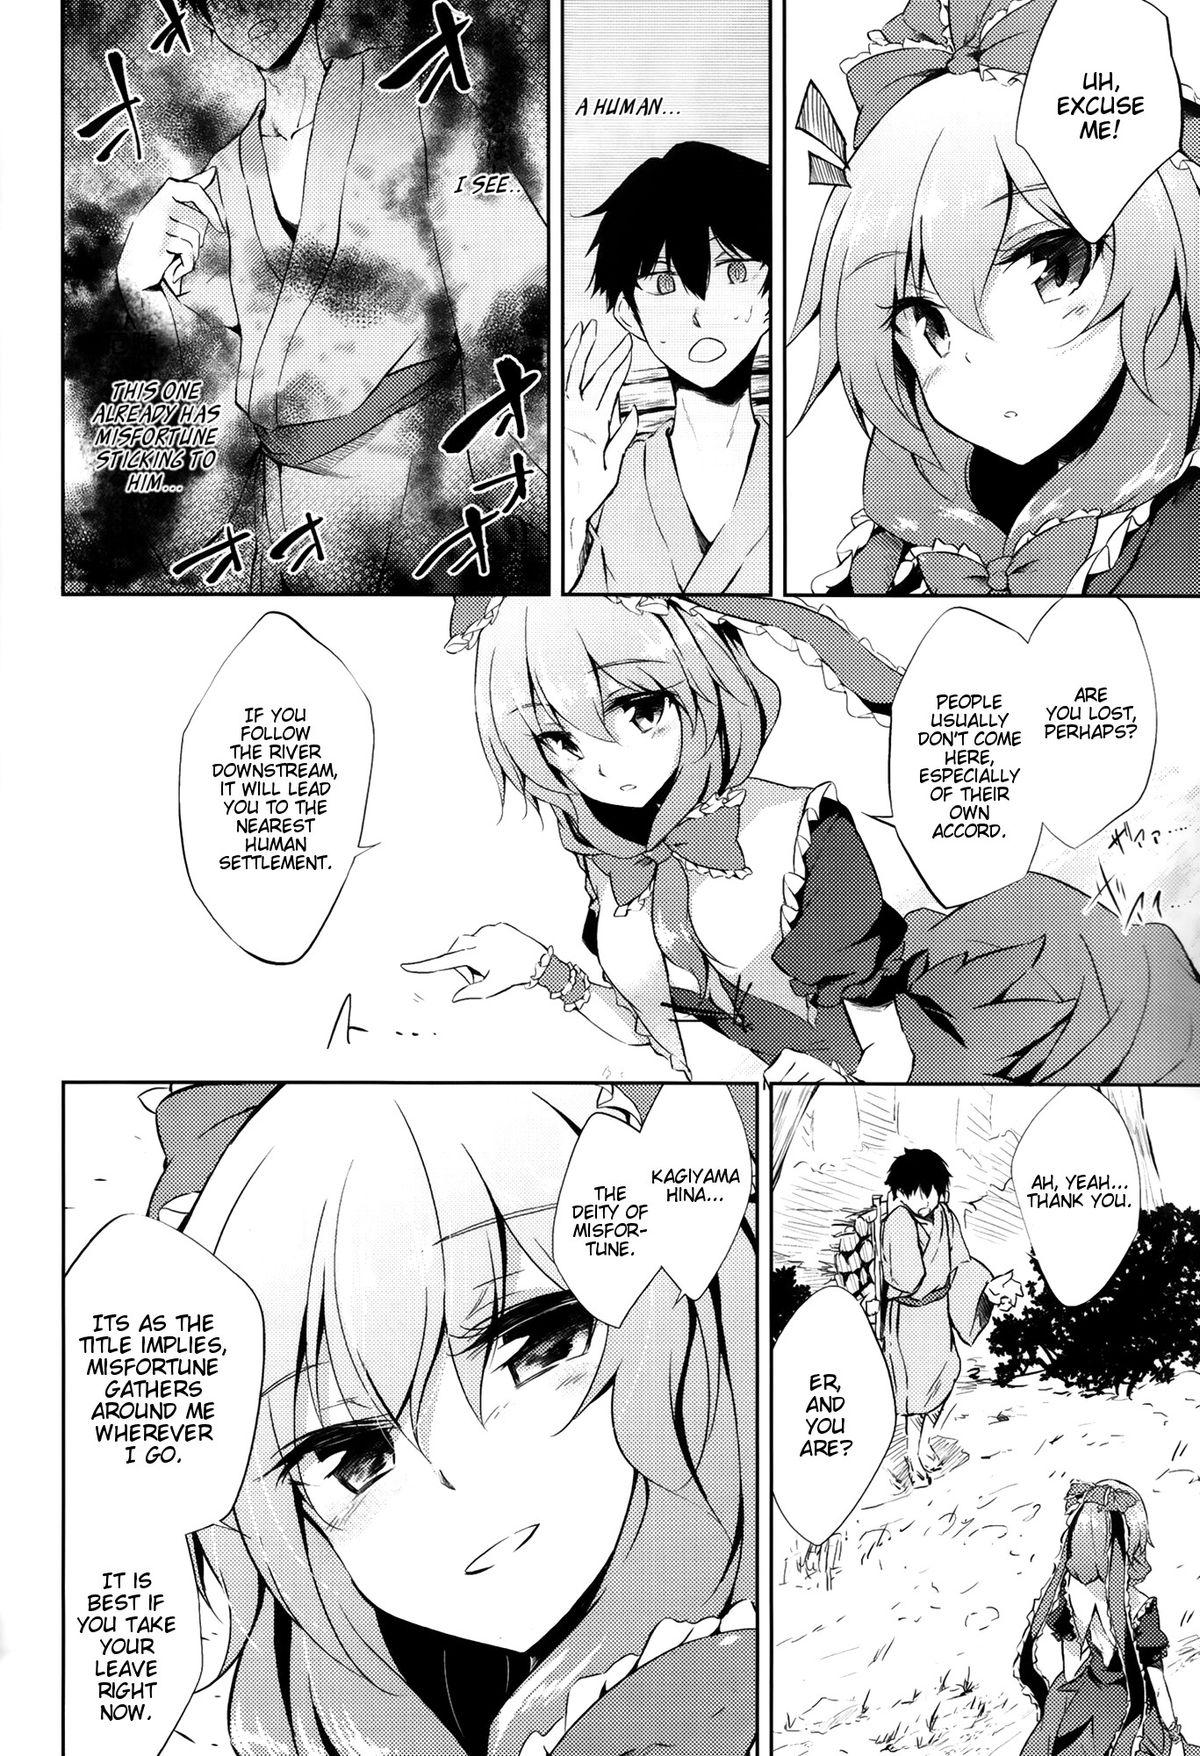 Nudist *Chuui* Horeru to Yakui kara | *Warning* Fall in love at your own risk - Touhou project Russia - Page 4